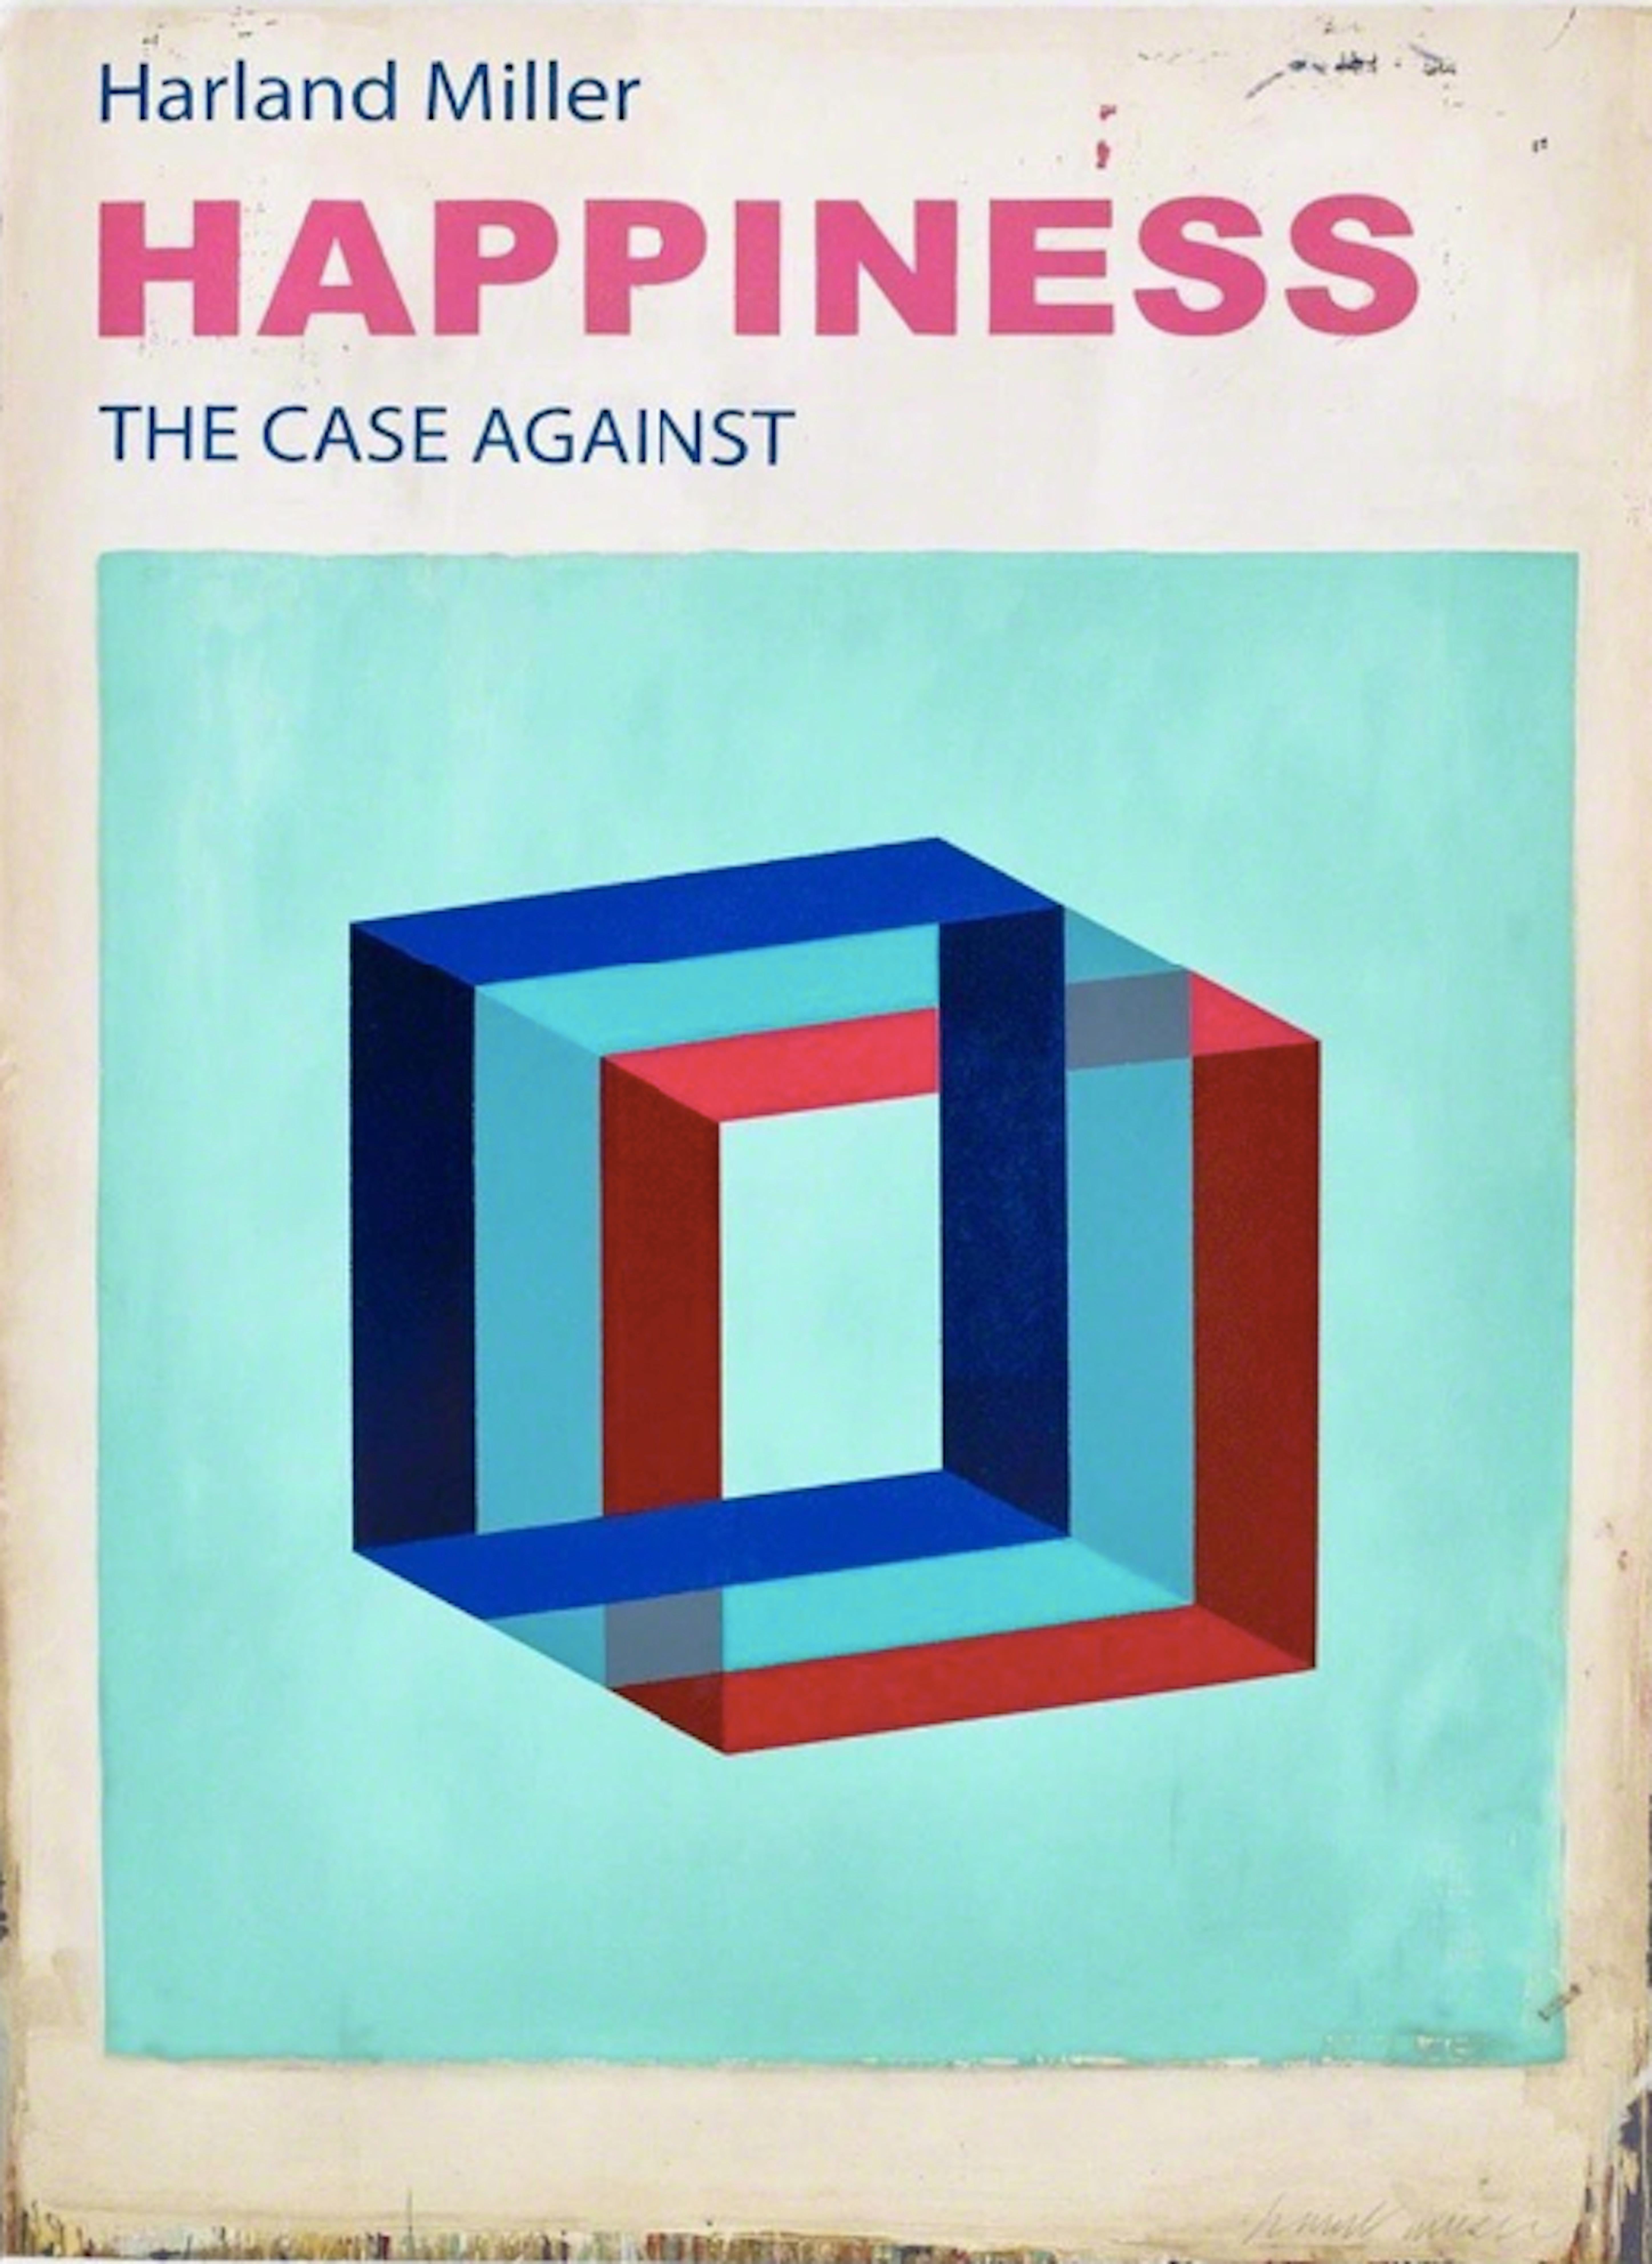 Harland Miller Print - Happiness the Case Against